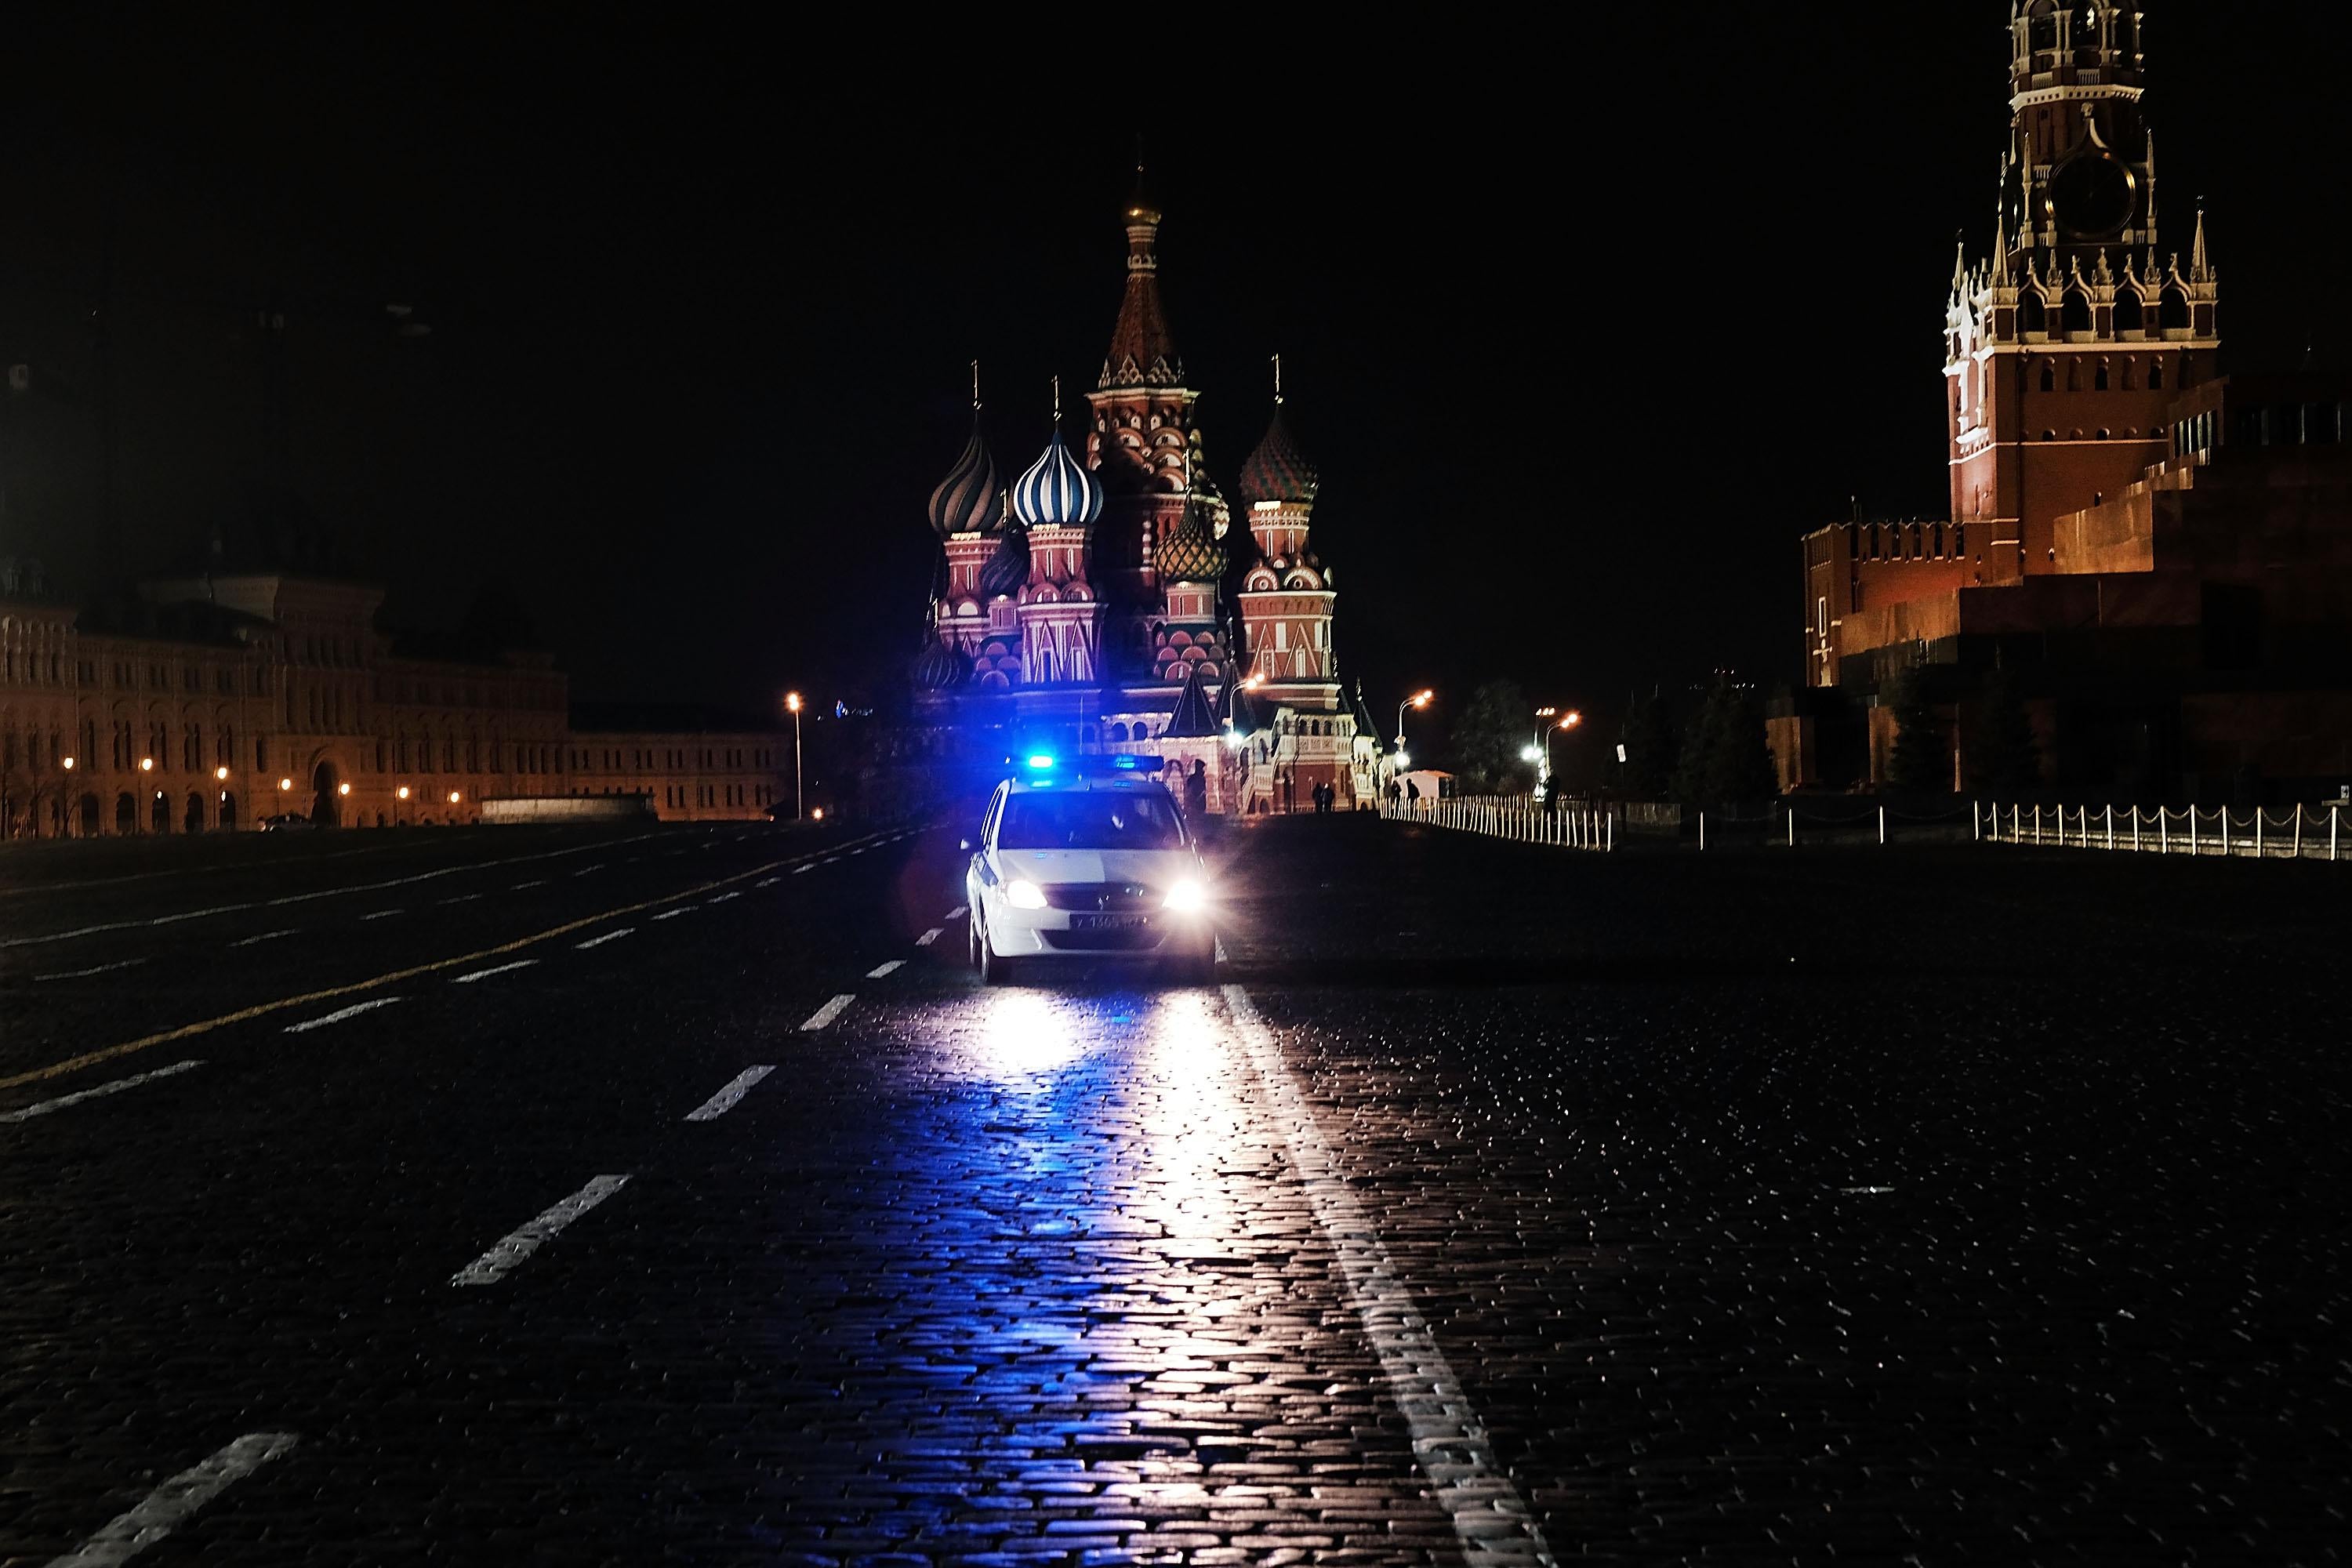 A police vehicle with flashing blue lights in front of Saint Basil's Cathedral at night.